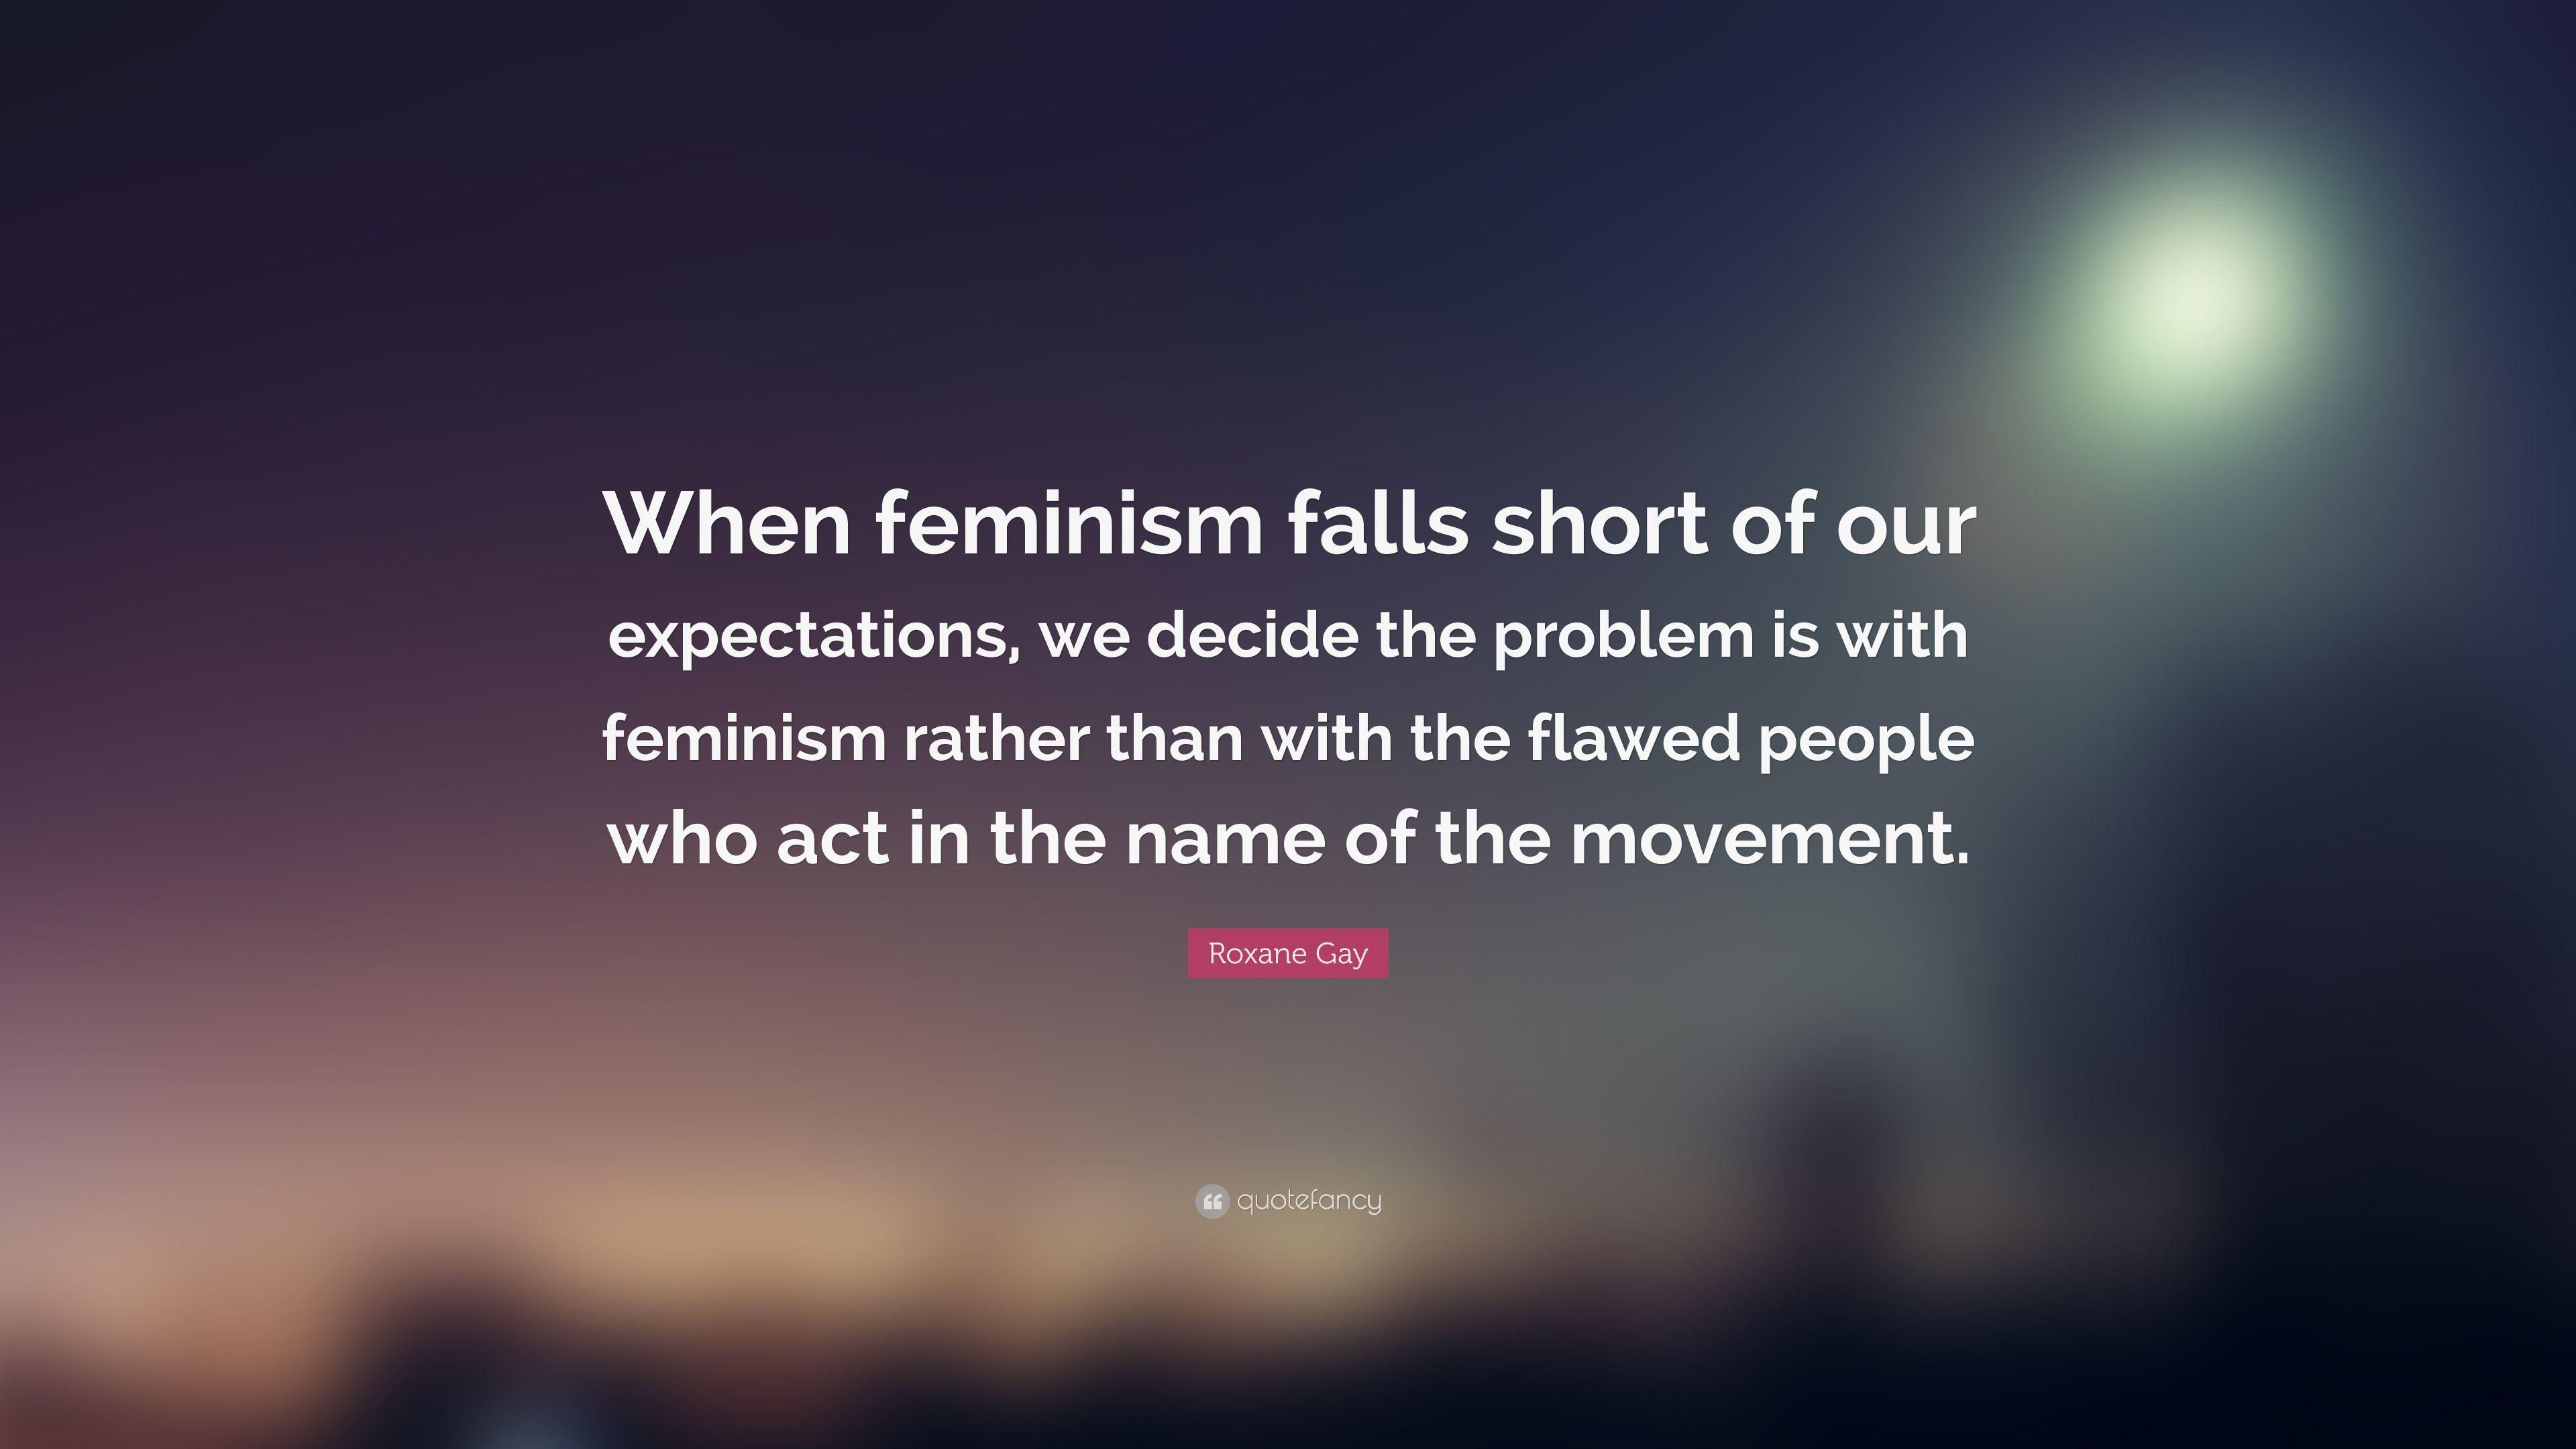 Roxane Gay Quote: “When feminism falls short of our expectations